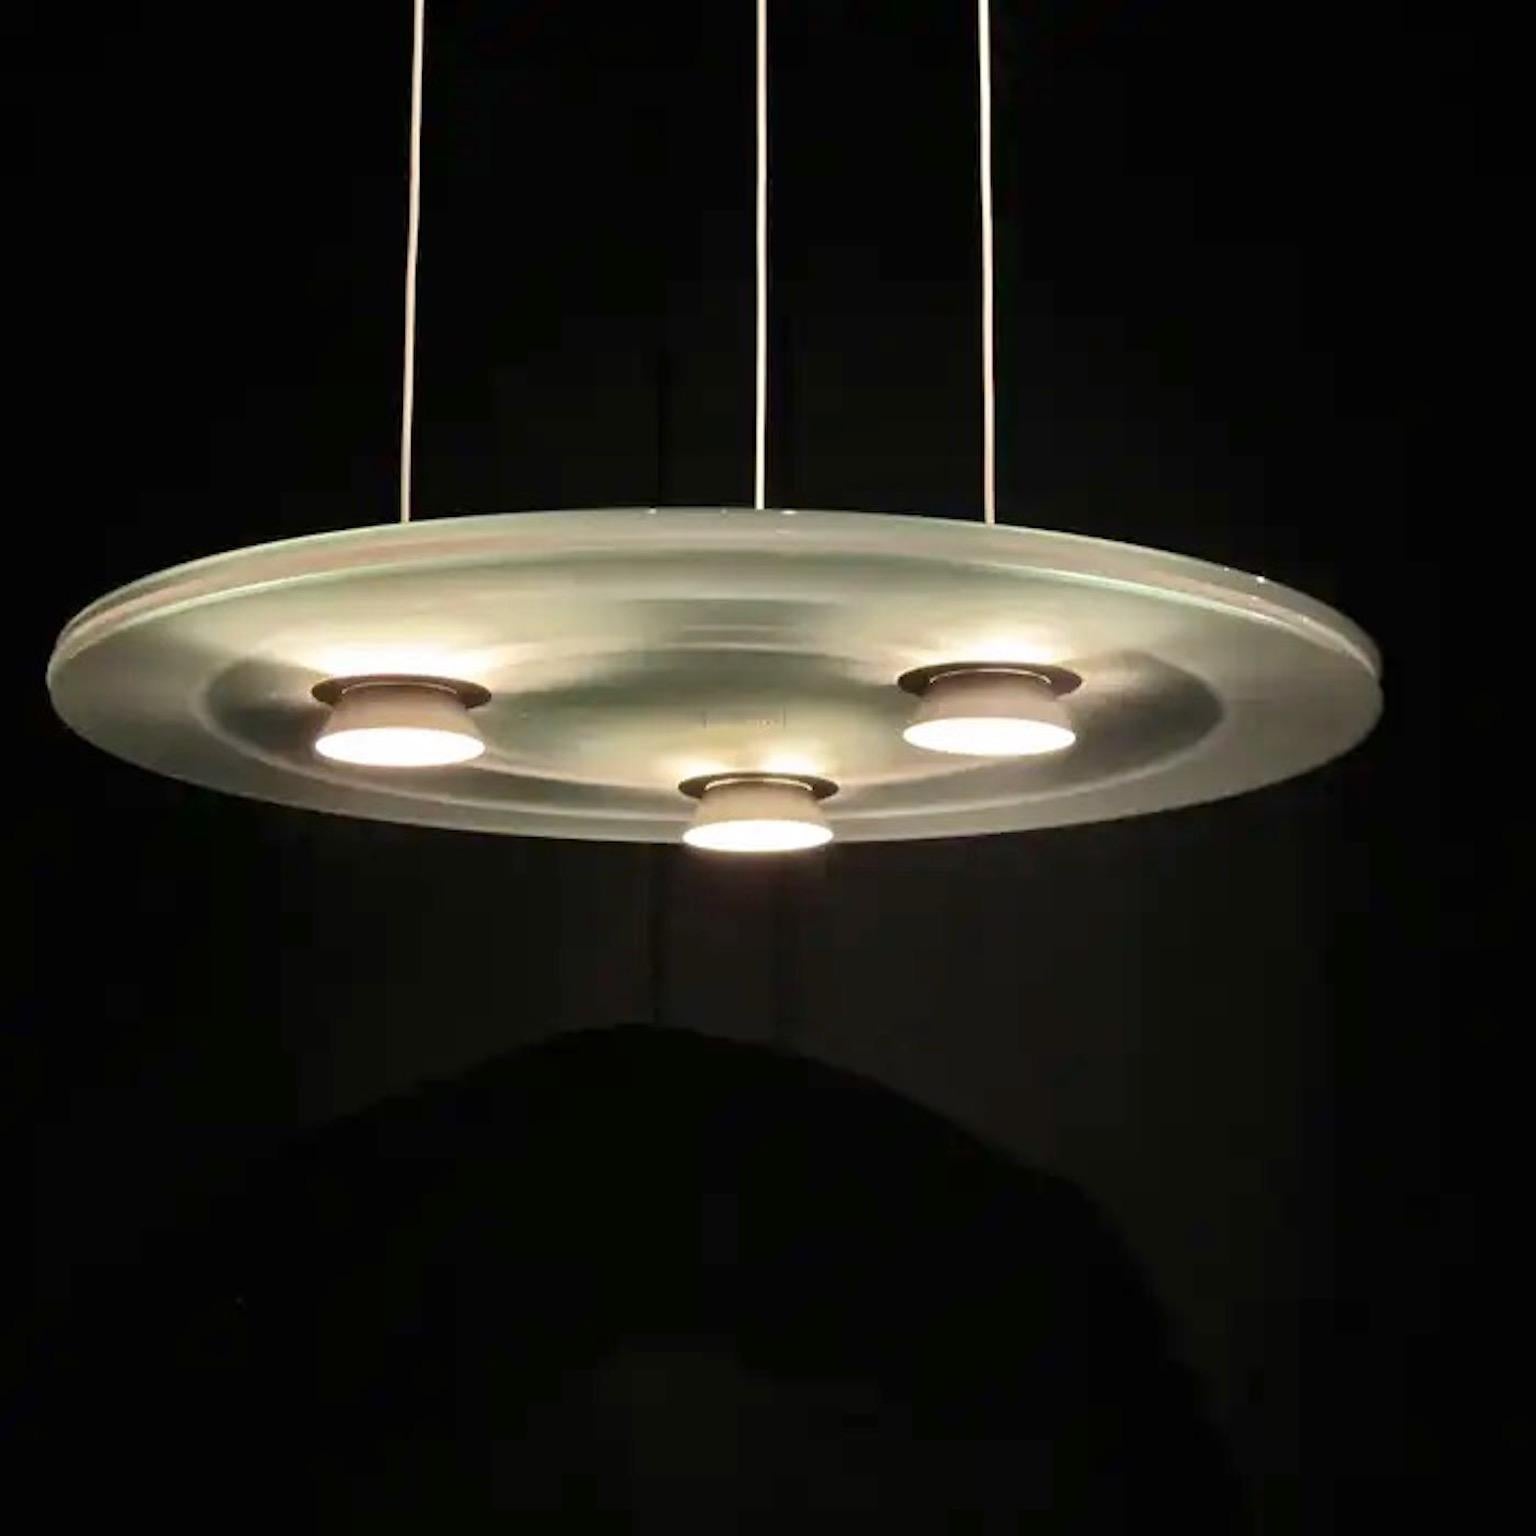 We have three Aurora pendants in the elusive white color, priced individually.
Perry King & Santiago Miranda designed the 'Aurora' pendant light in 1982 for Arteluce, by then a division of FLOS.
The Aurora provides direct and diffused light with